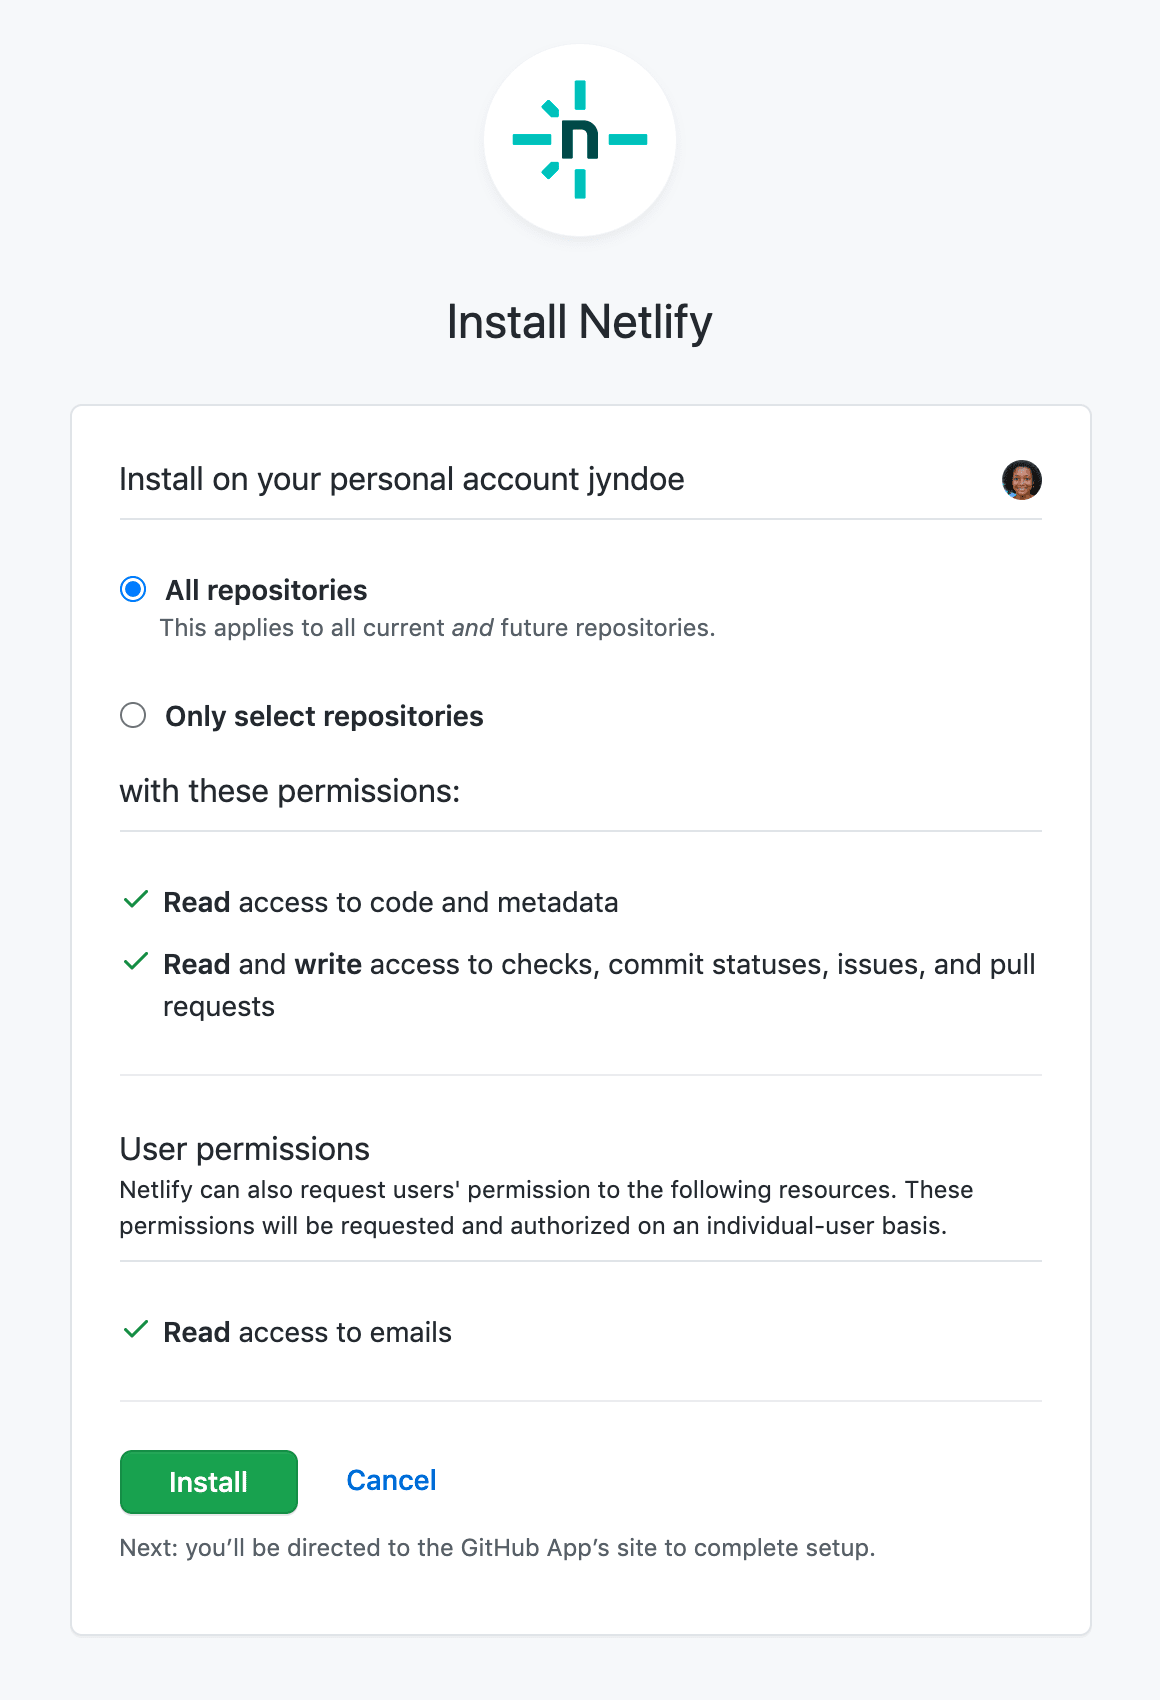 GitHub’s prompt to install the Netlify GitHub App, including permissions, and options to select repositories.